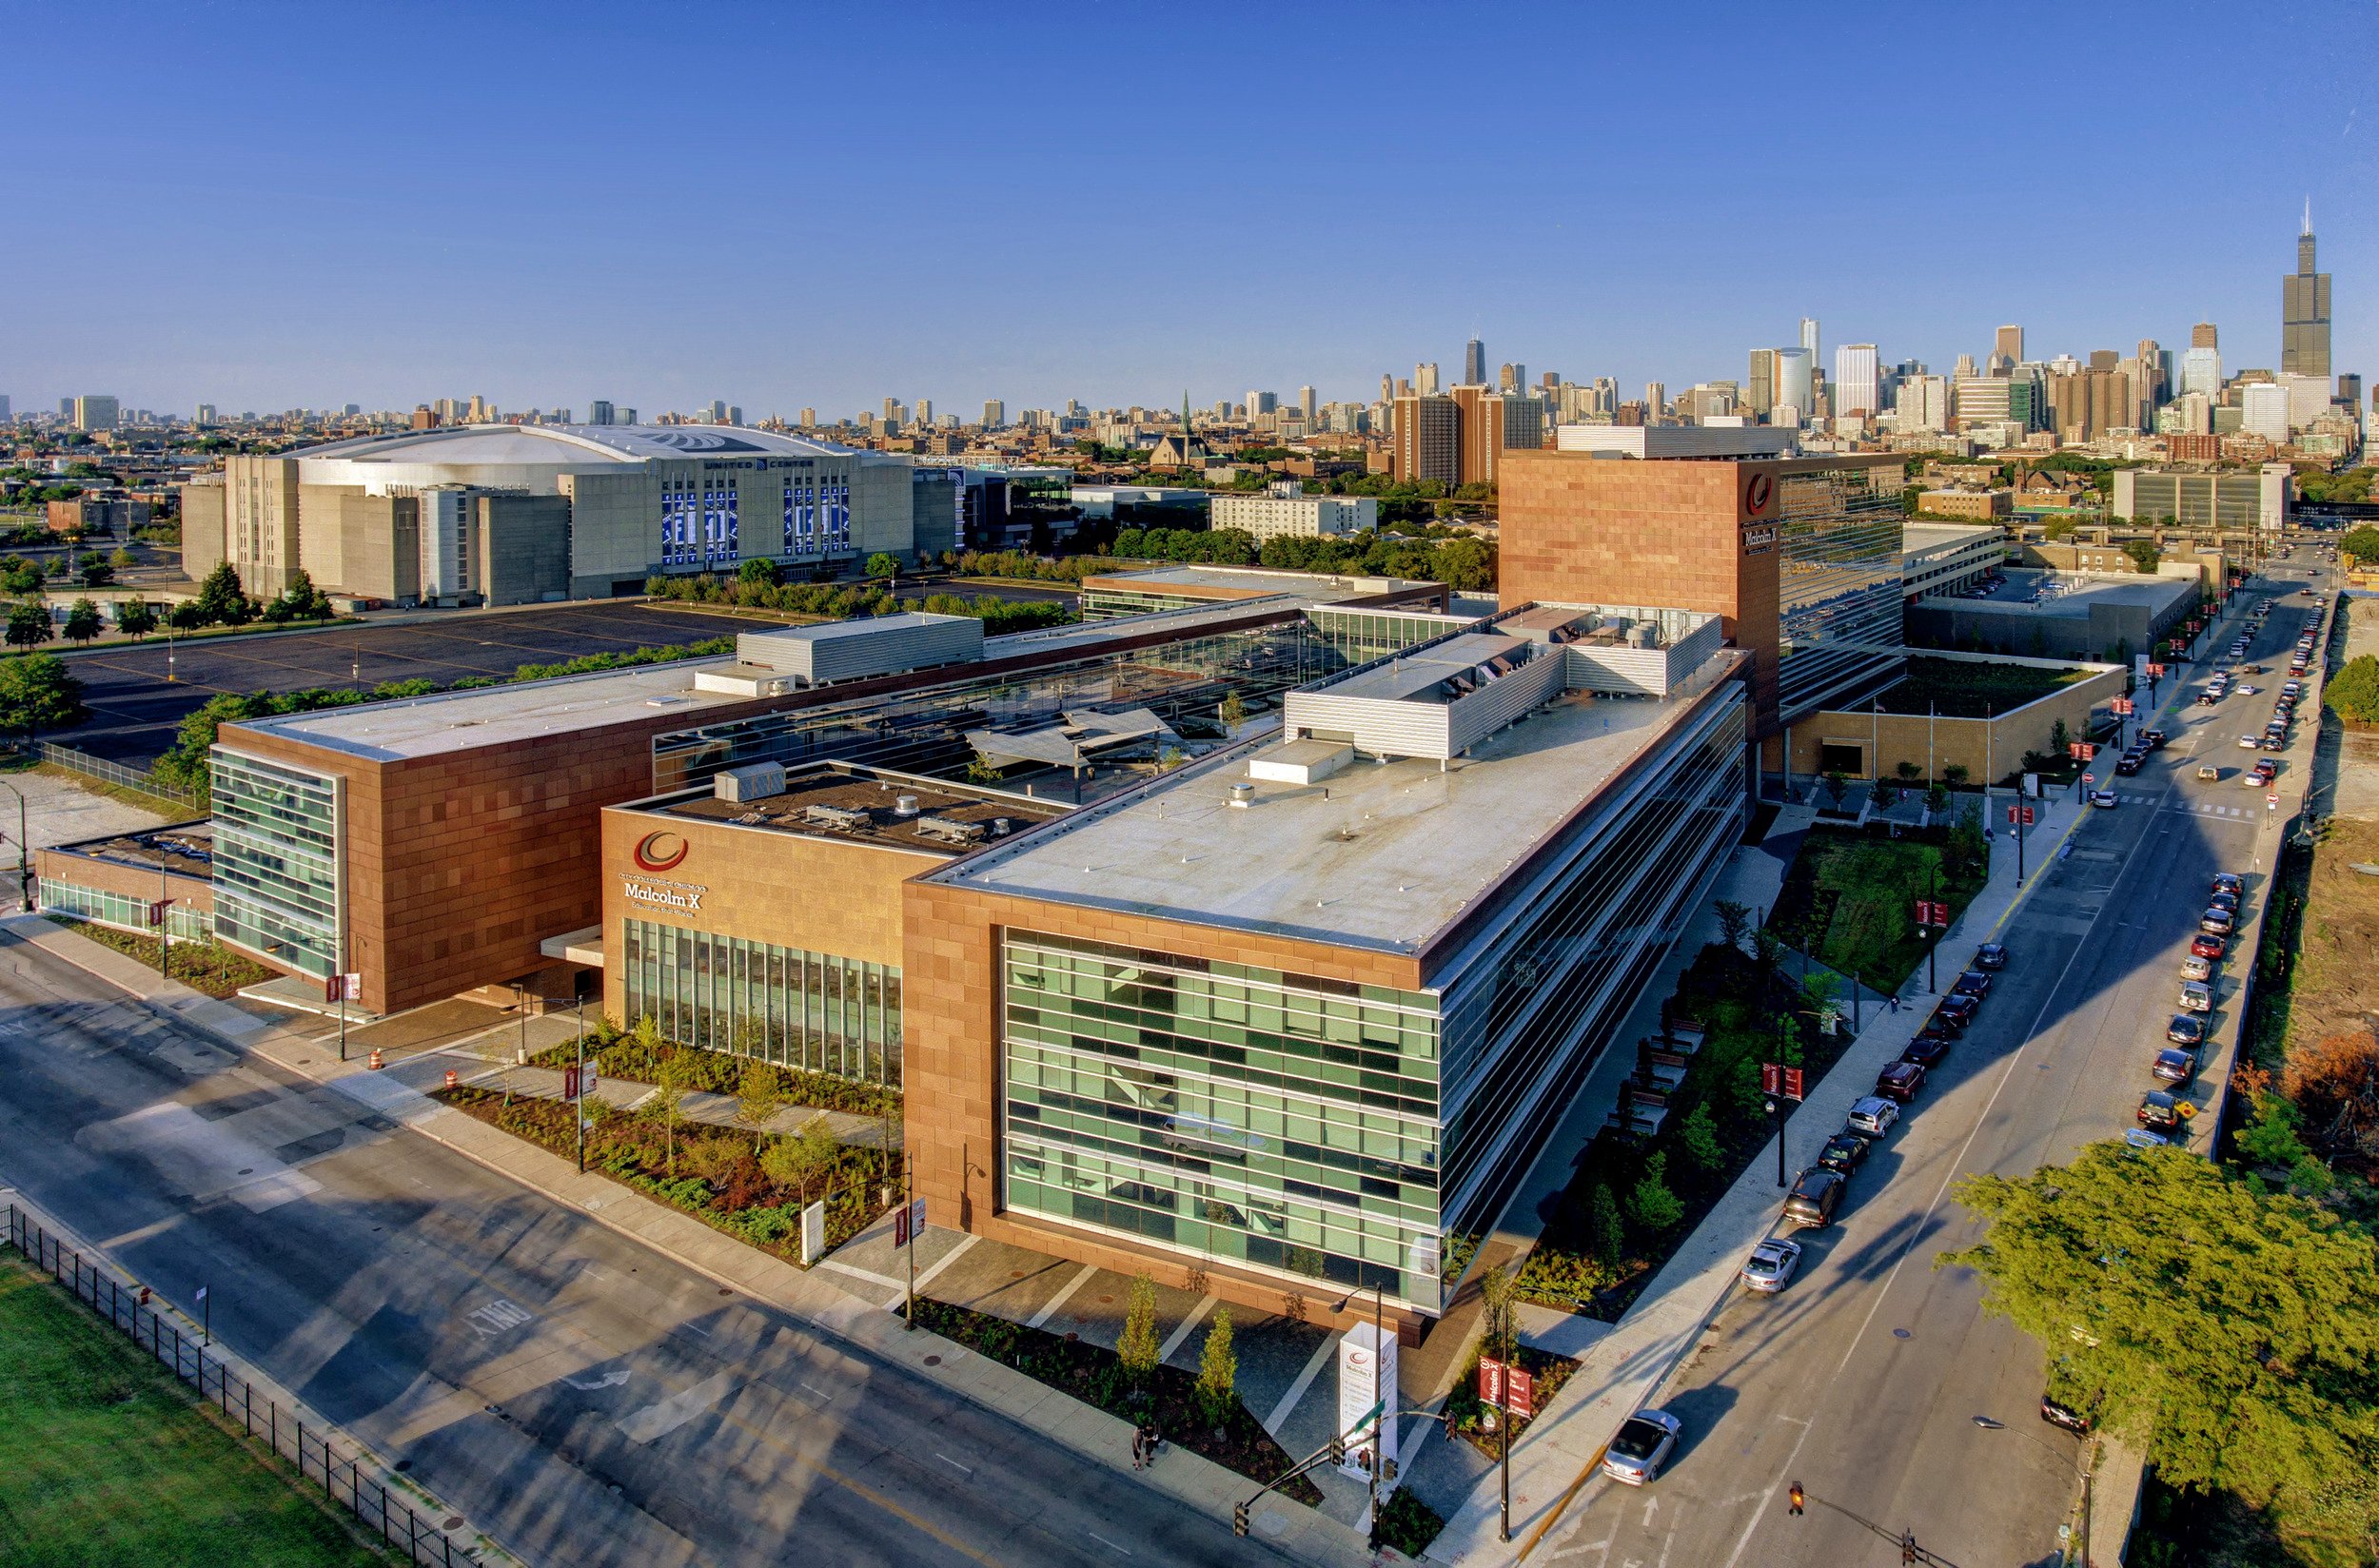 Malcolm X College and School of Health Sciences image